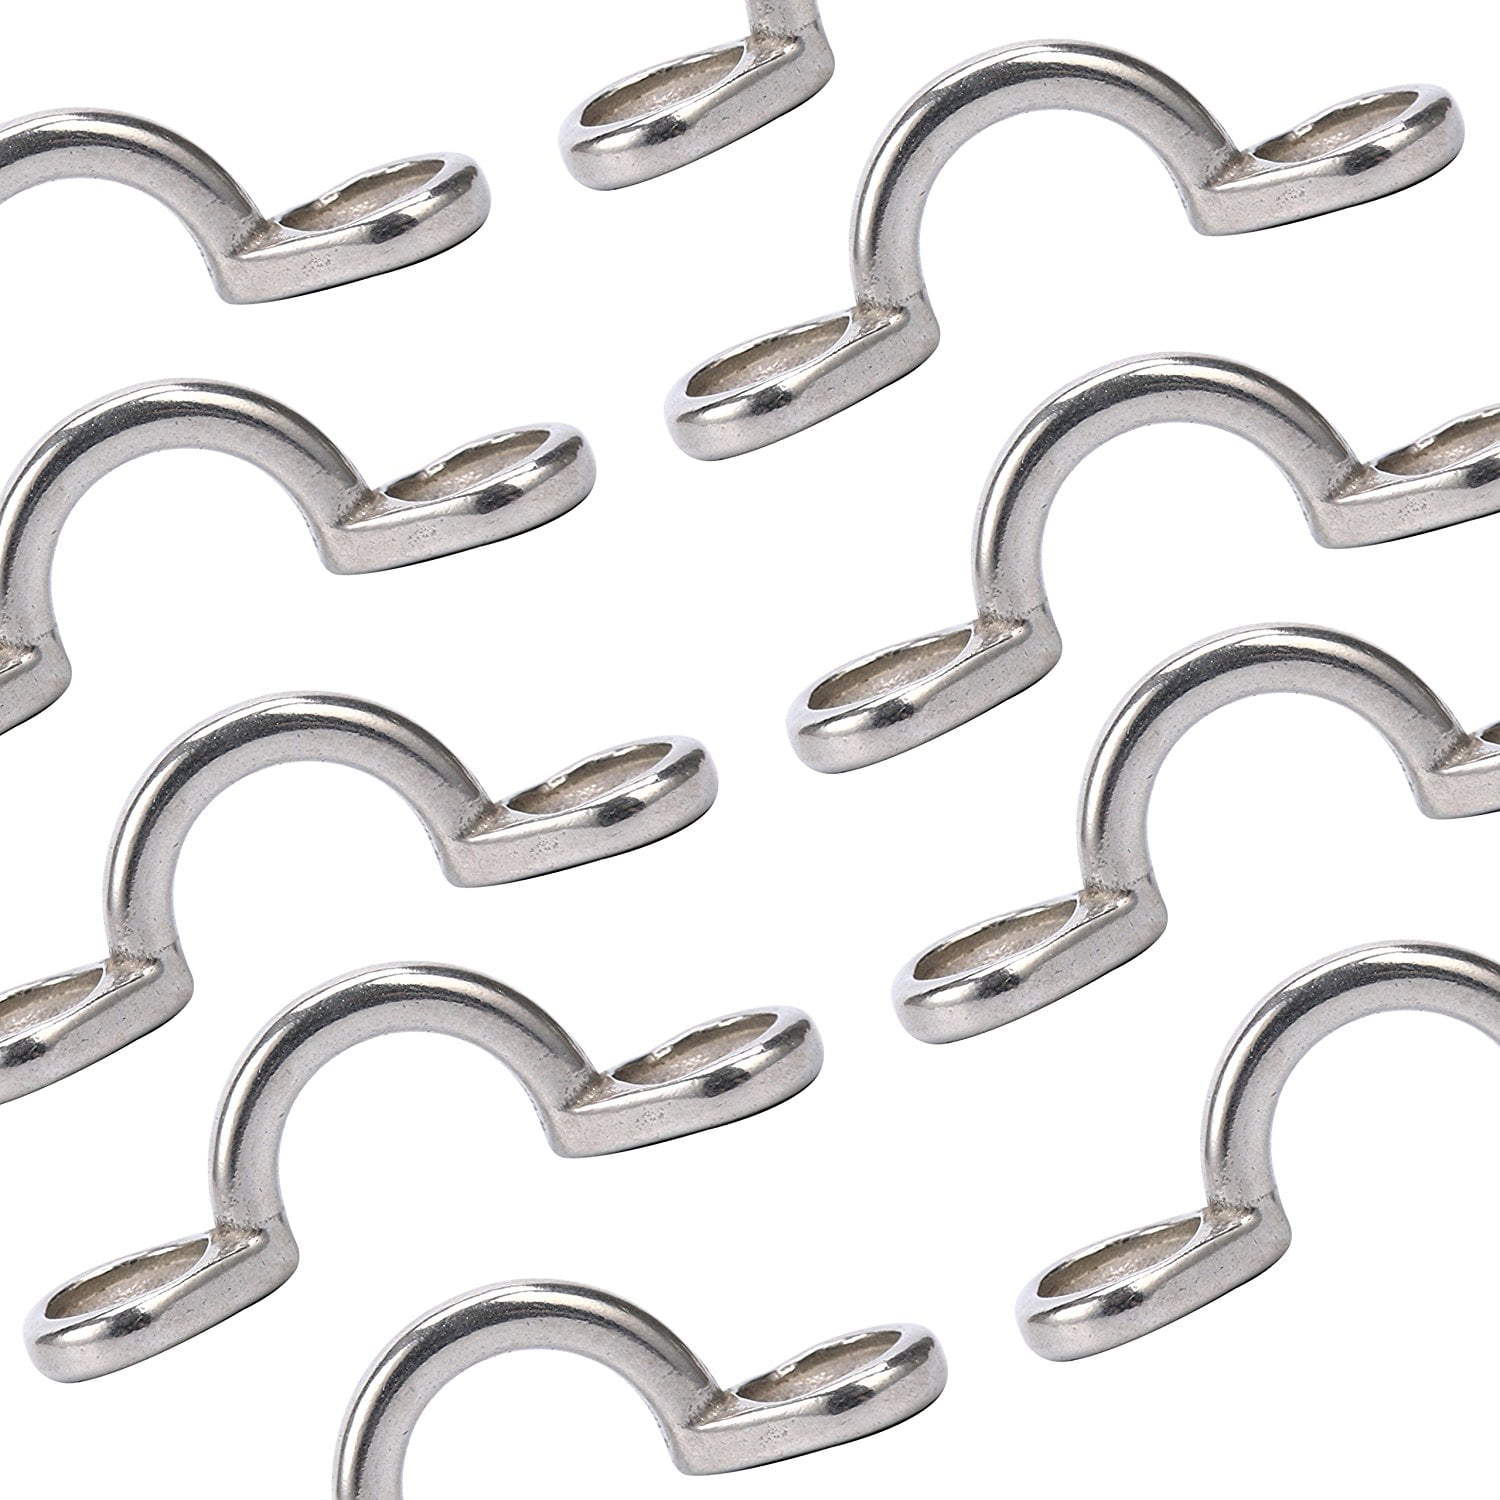 Boat Replacement Maintenance Part 4 x 316 Stainless Steel Bimini Boat Top Pad Eye Straps Footmans Loop Marine Boat Car accessories for Kayak Canoe Rigging Tie Down Anchor Point Kayak Deck Loops 